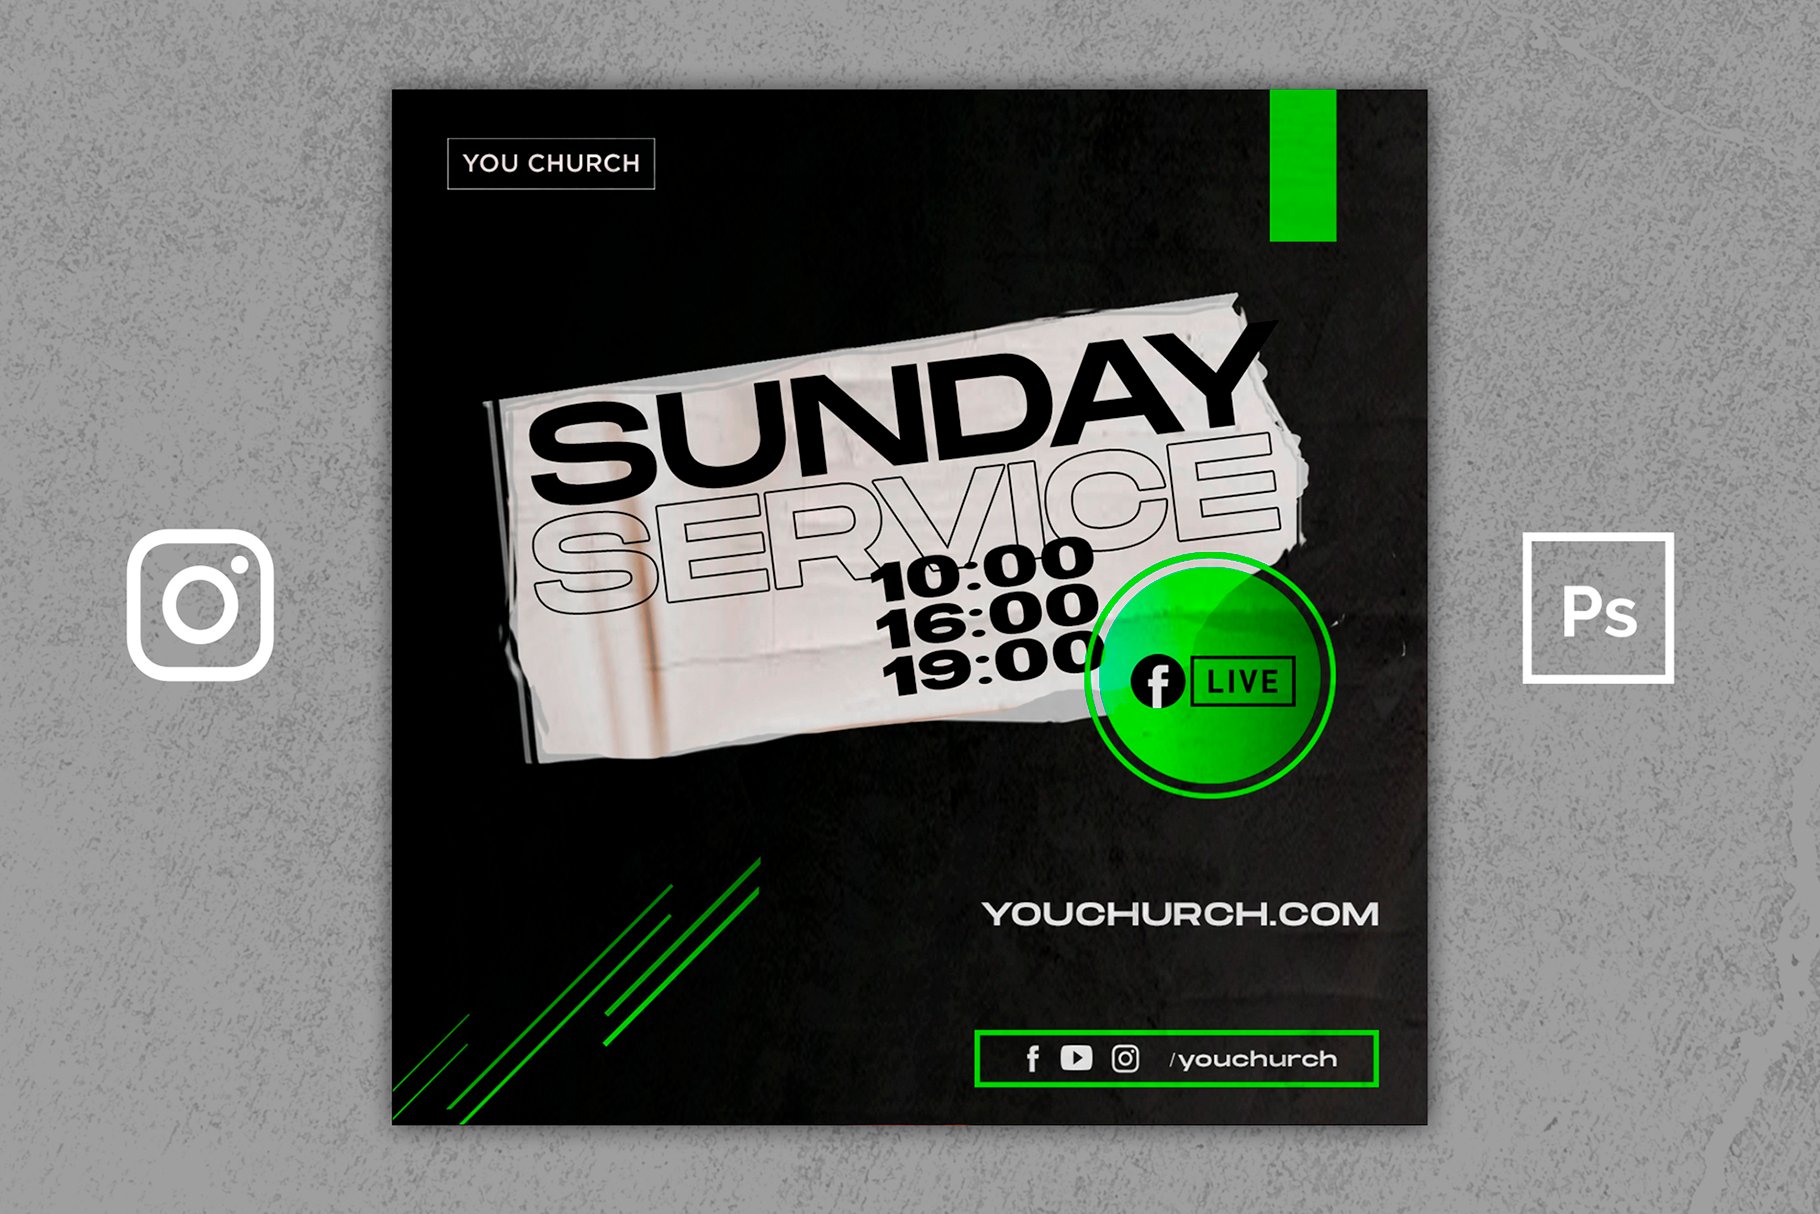 Church Flyer - Sunday Service cover image.